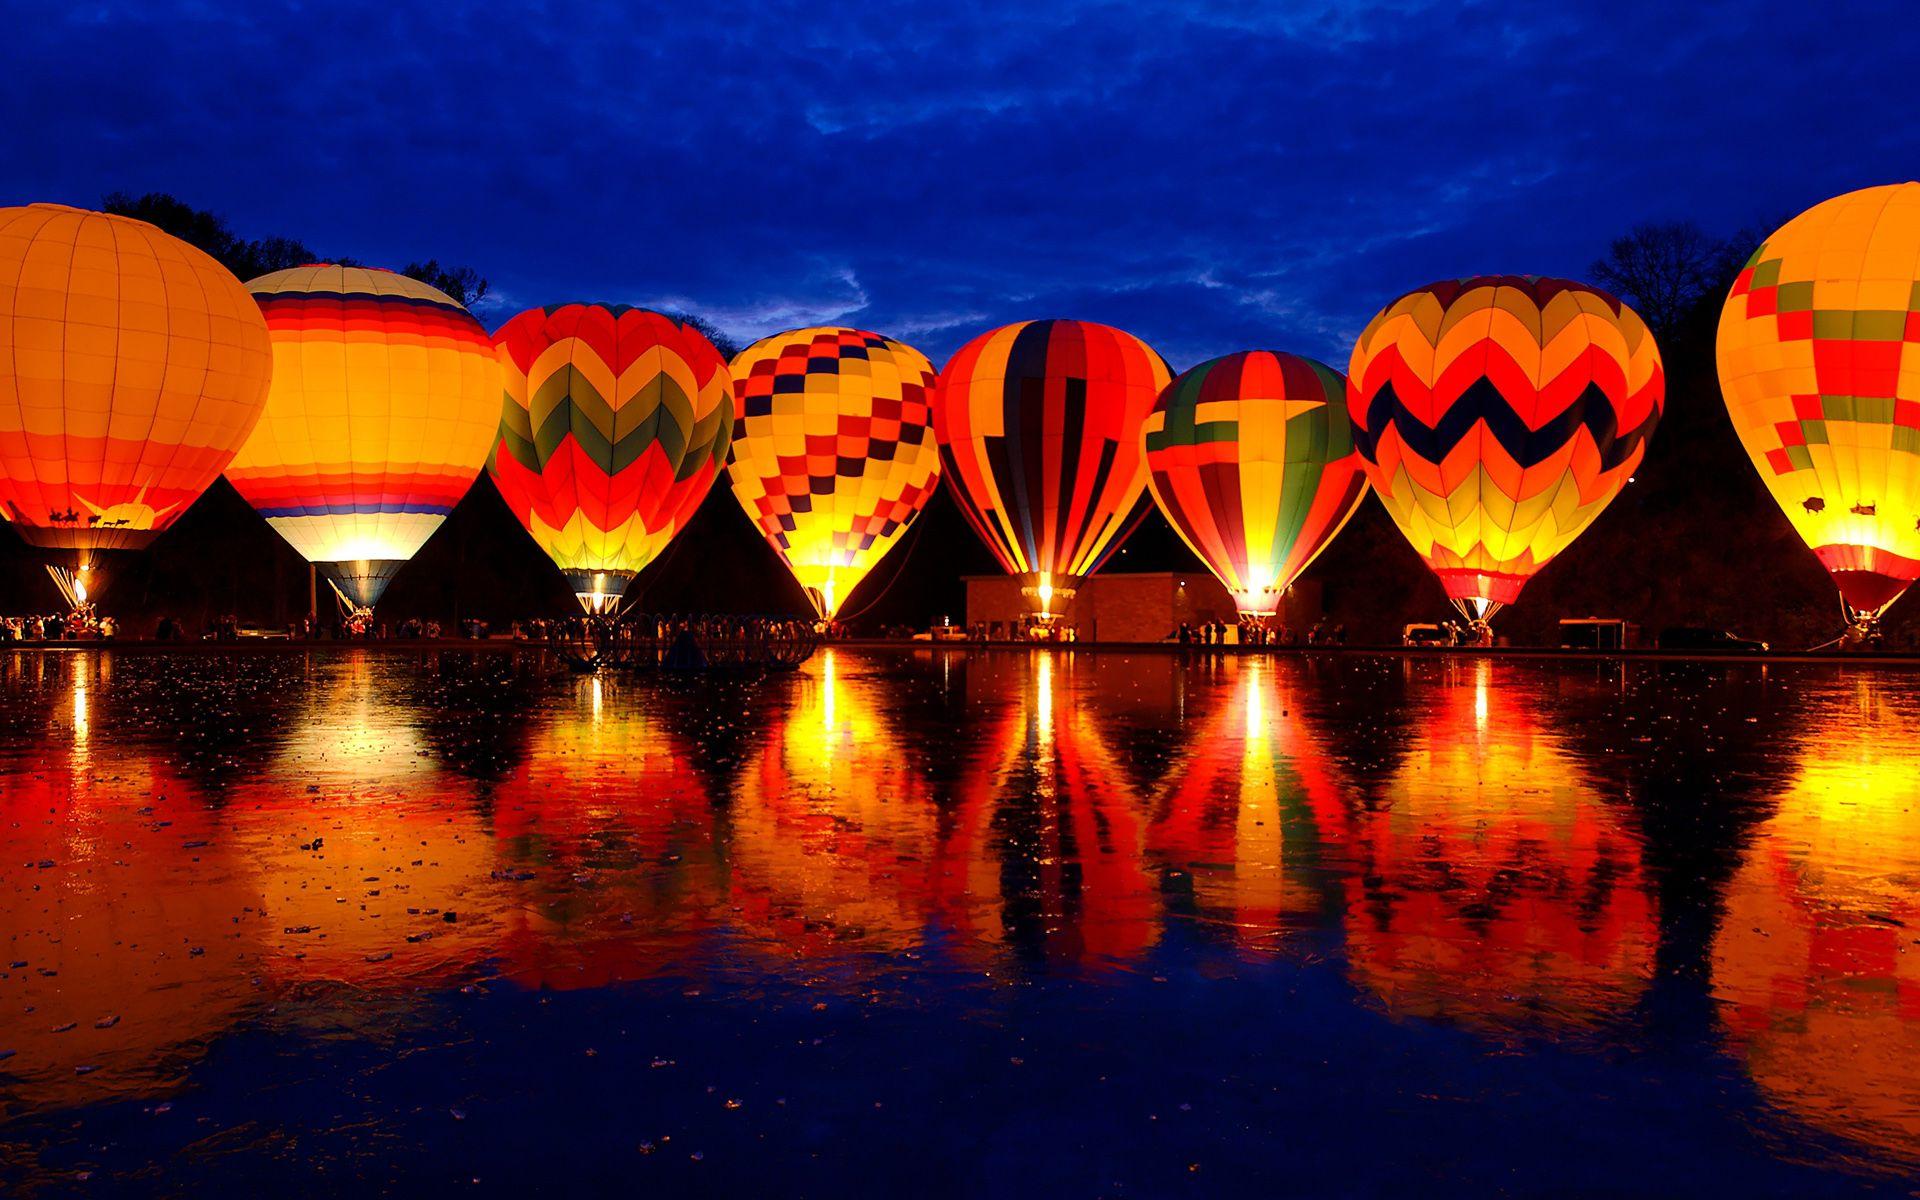 balloons paris Image Search Results. Beautiful